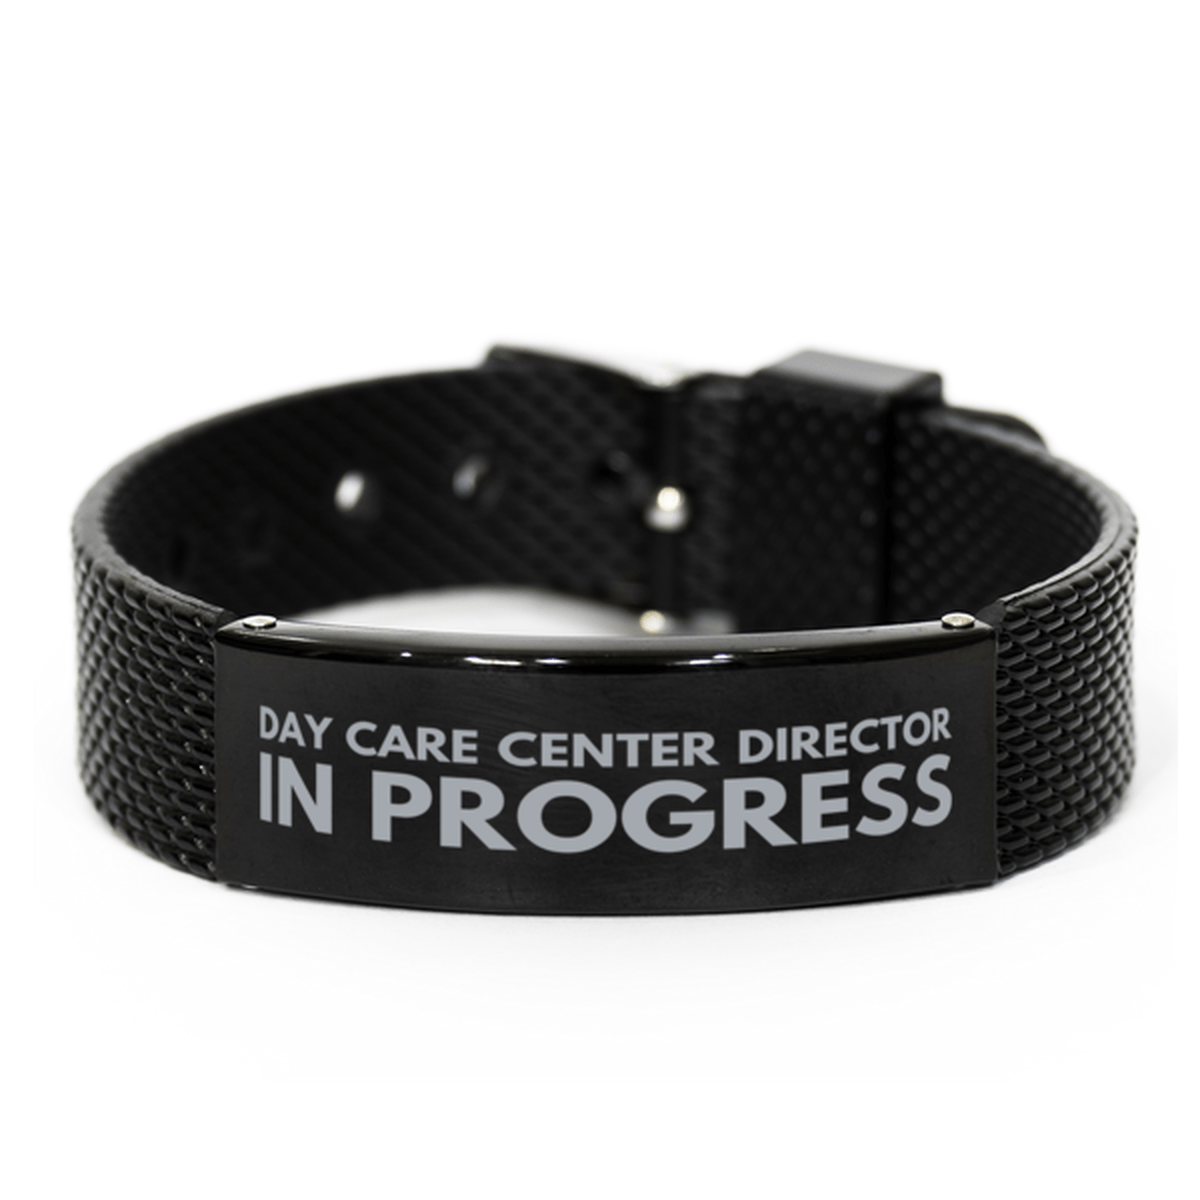 Inspirational Day Care Center Director Black Shark Mesh Bracelet, Day Care Center Director In Progress, Best Graduation Gifts for Students